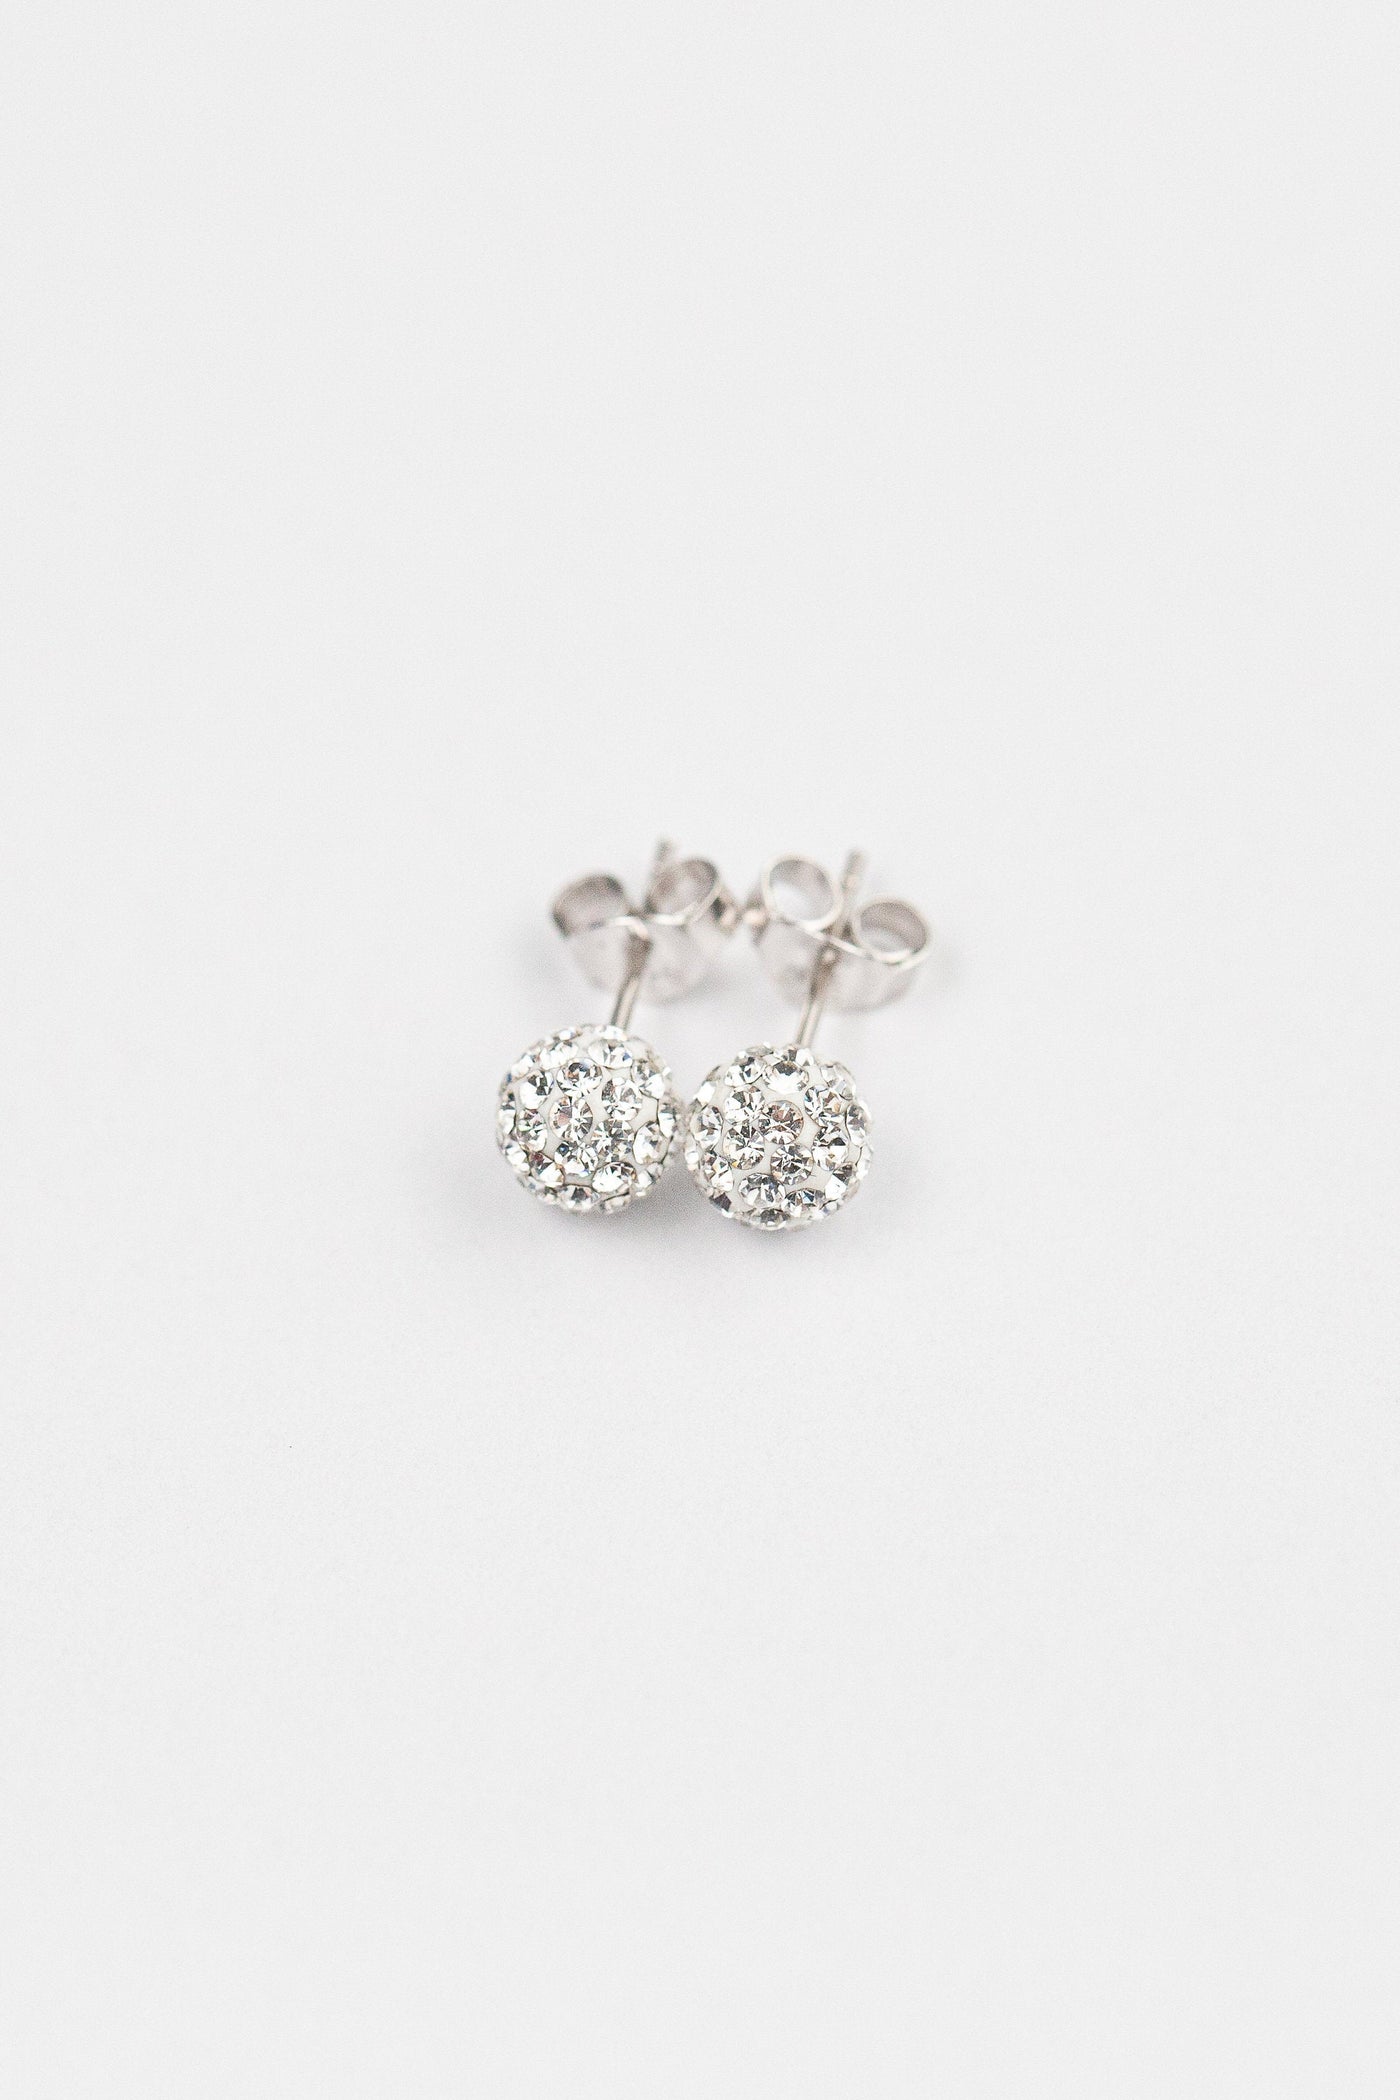 6mm Disco Ball Stud Earrings in Clear | Annie and Sisters | sister stud earrings, for kids, children's jewelry, kid's jewelry, best friend